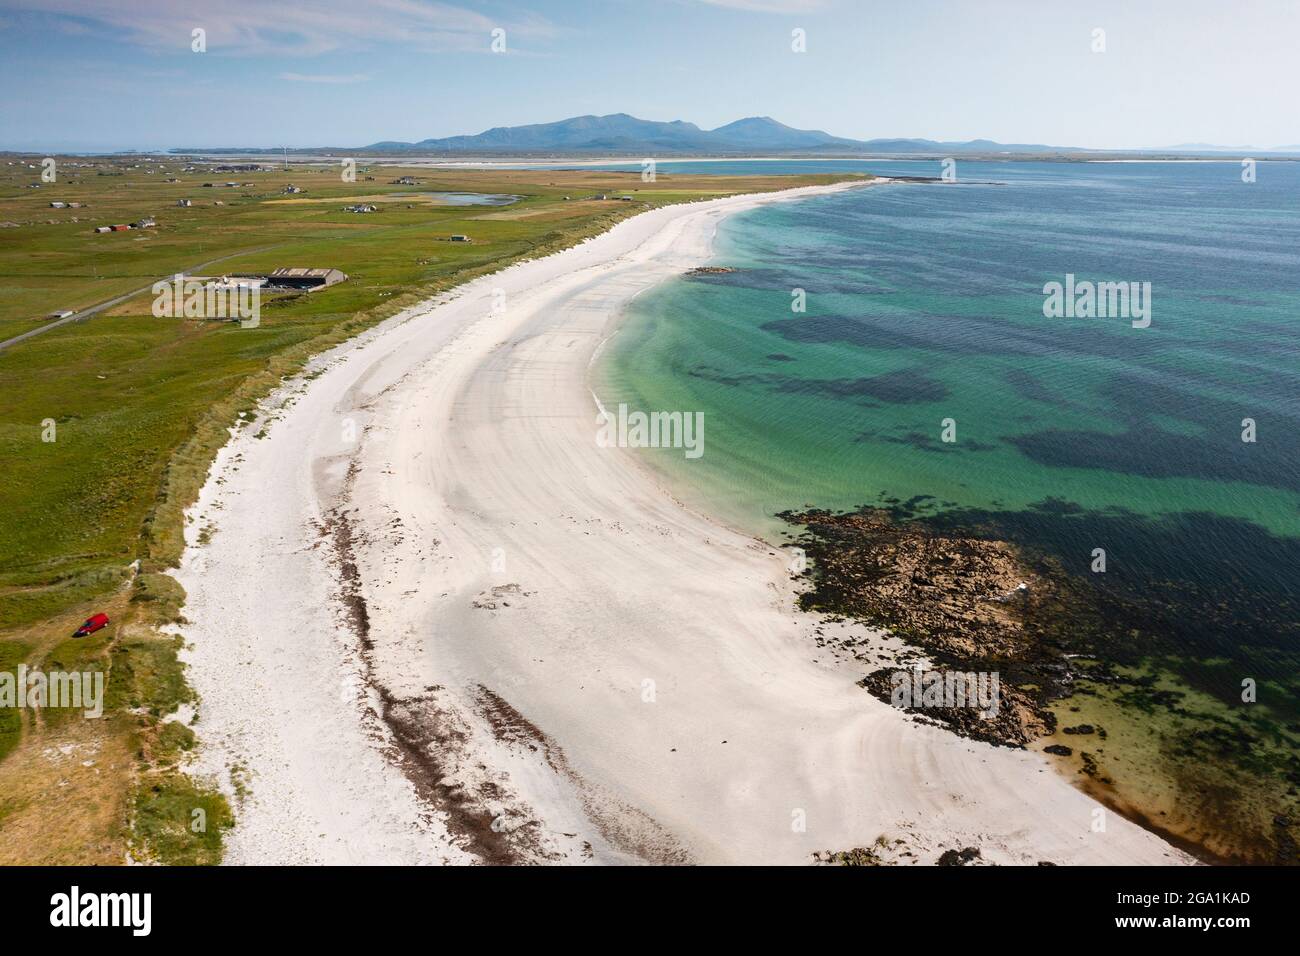 Aerial view from drone of white sands on beach on west coast of island of Benbecula looking south to South Uist, Outer Hebrides, Scotland, UK Stock Photo